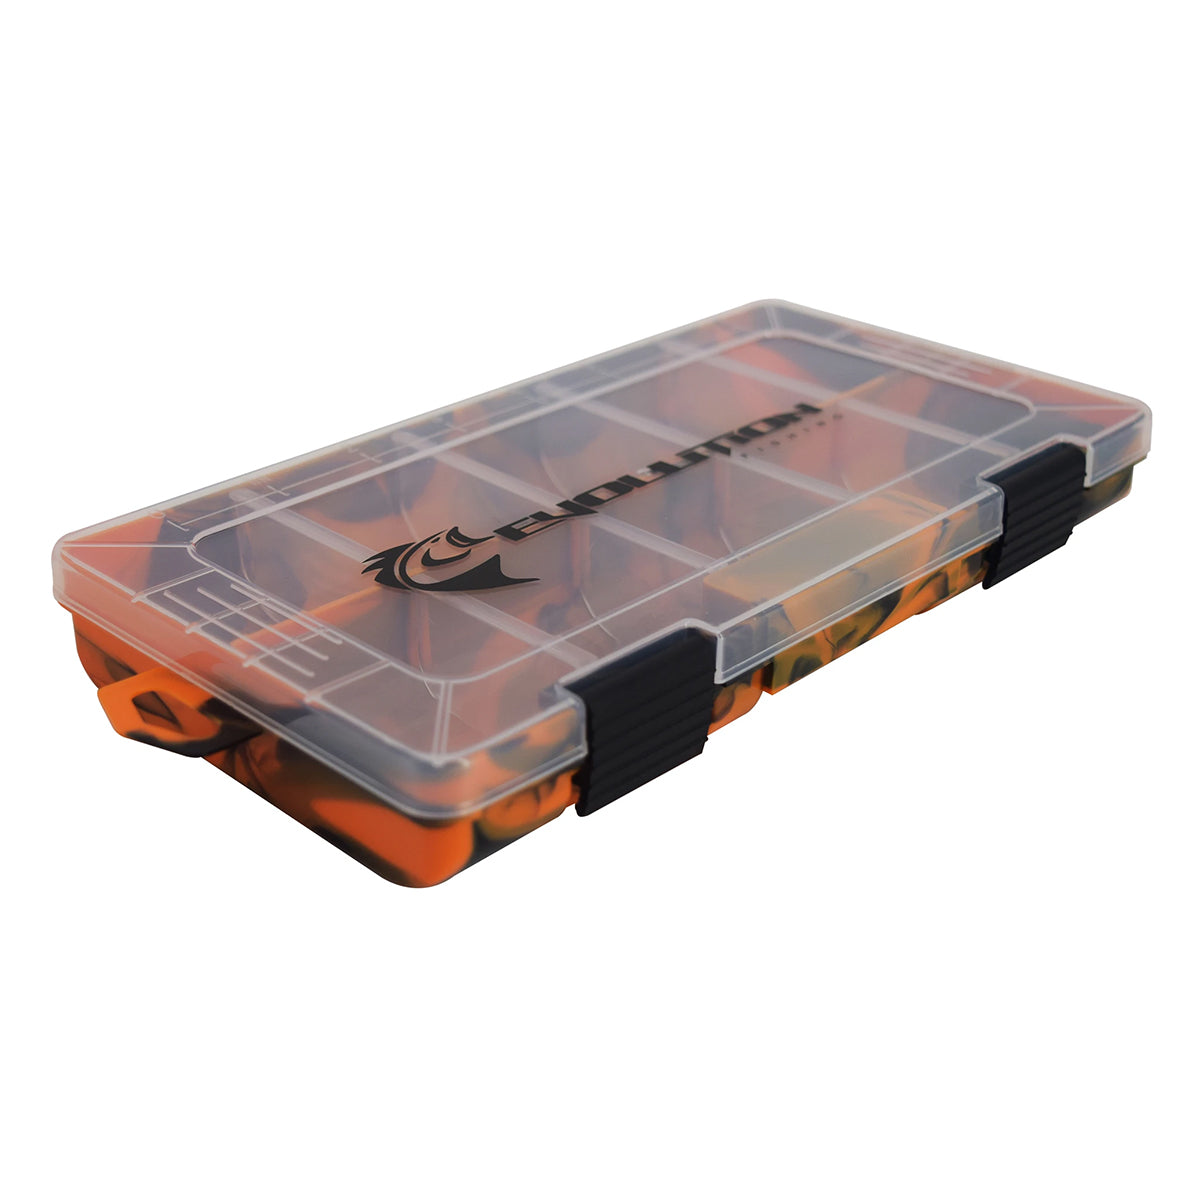 Shop Online Fishing Accessories in Arizona, Fishing Tools and Accessories, Fishing Accessories Tackle Tray